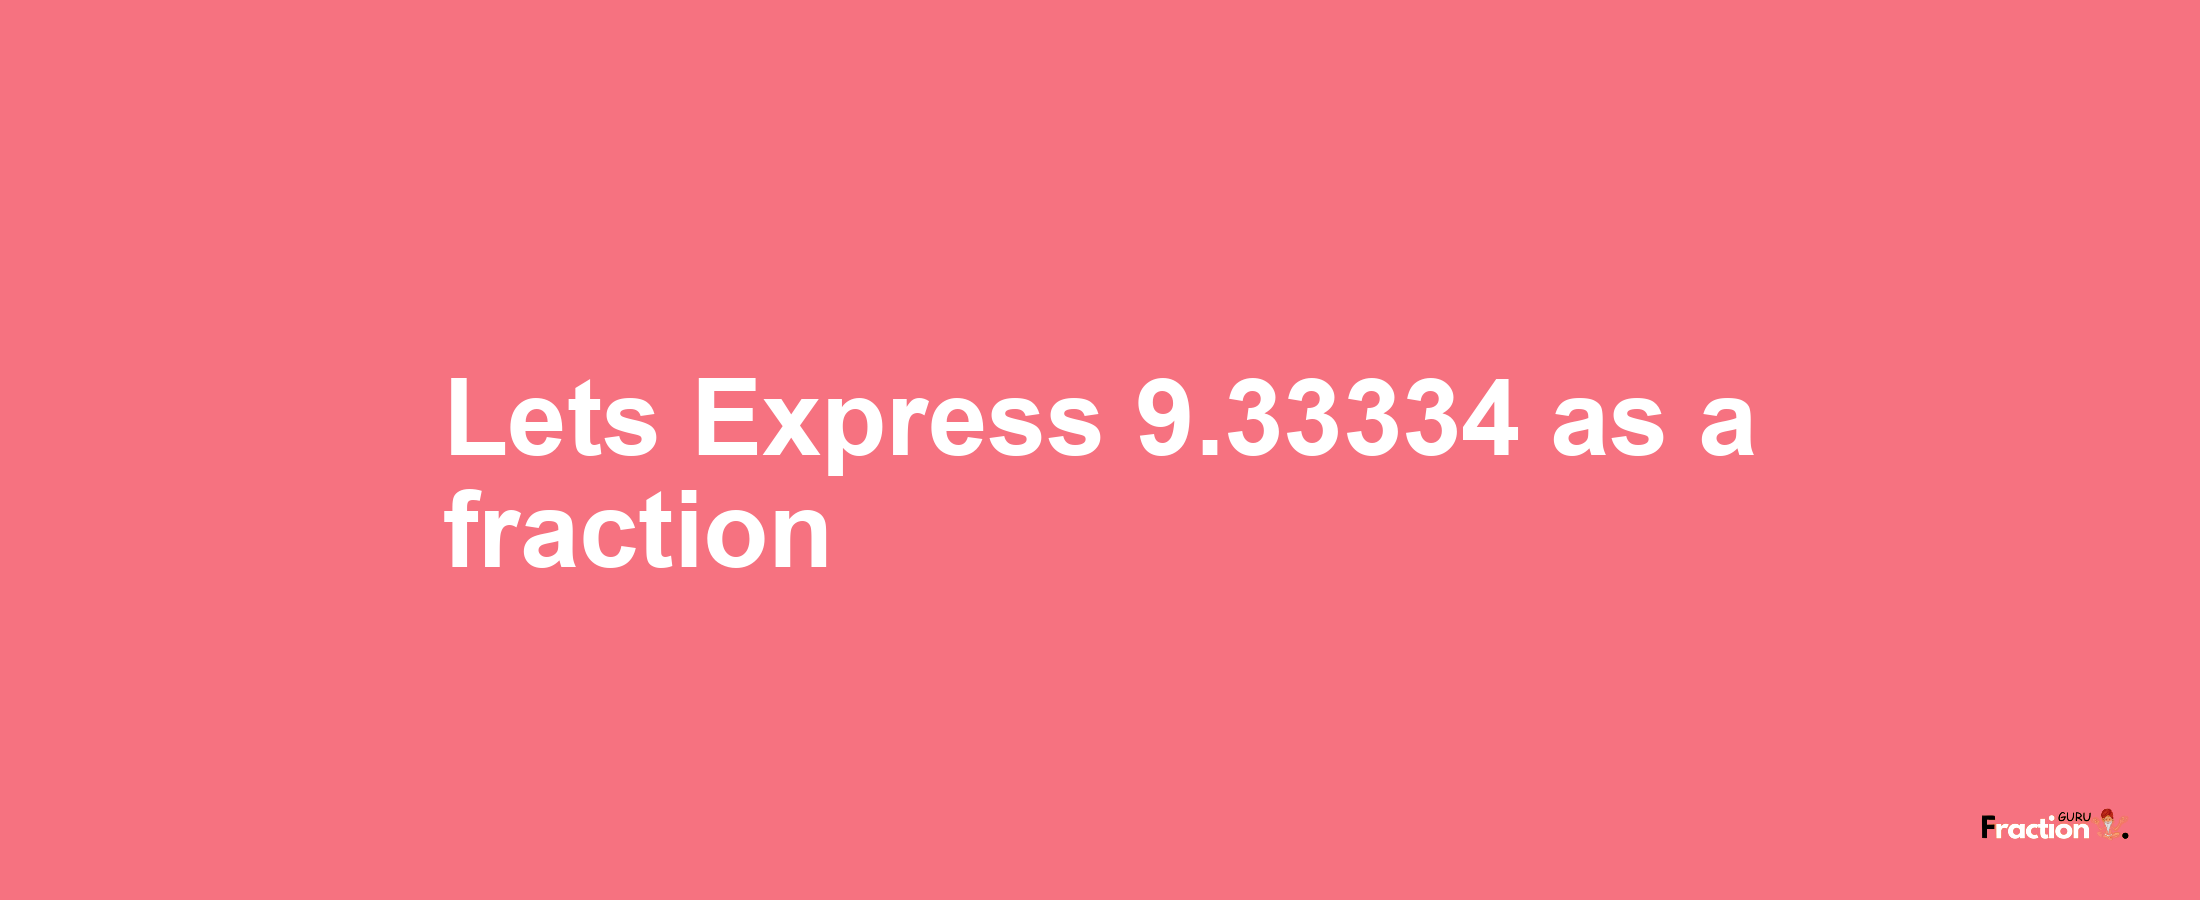 Lets Express 9.33334 as afraction